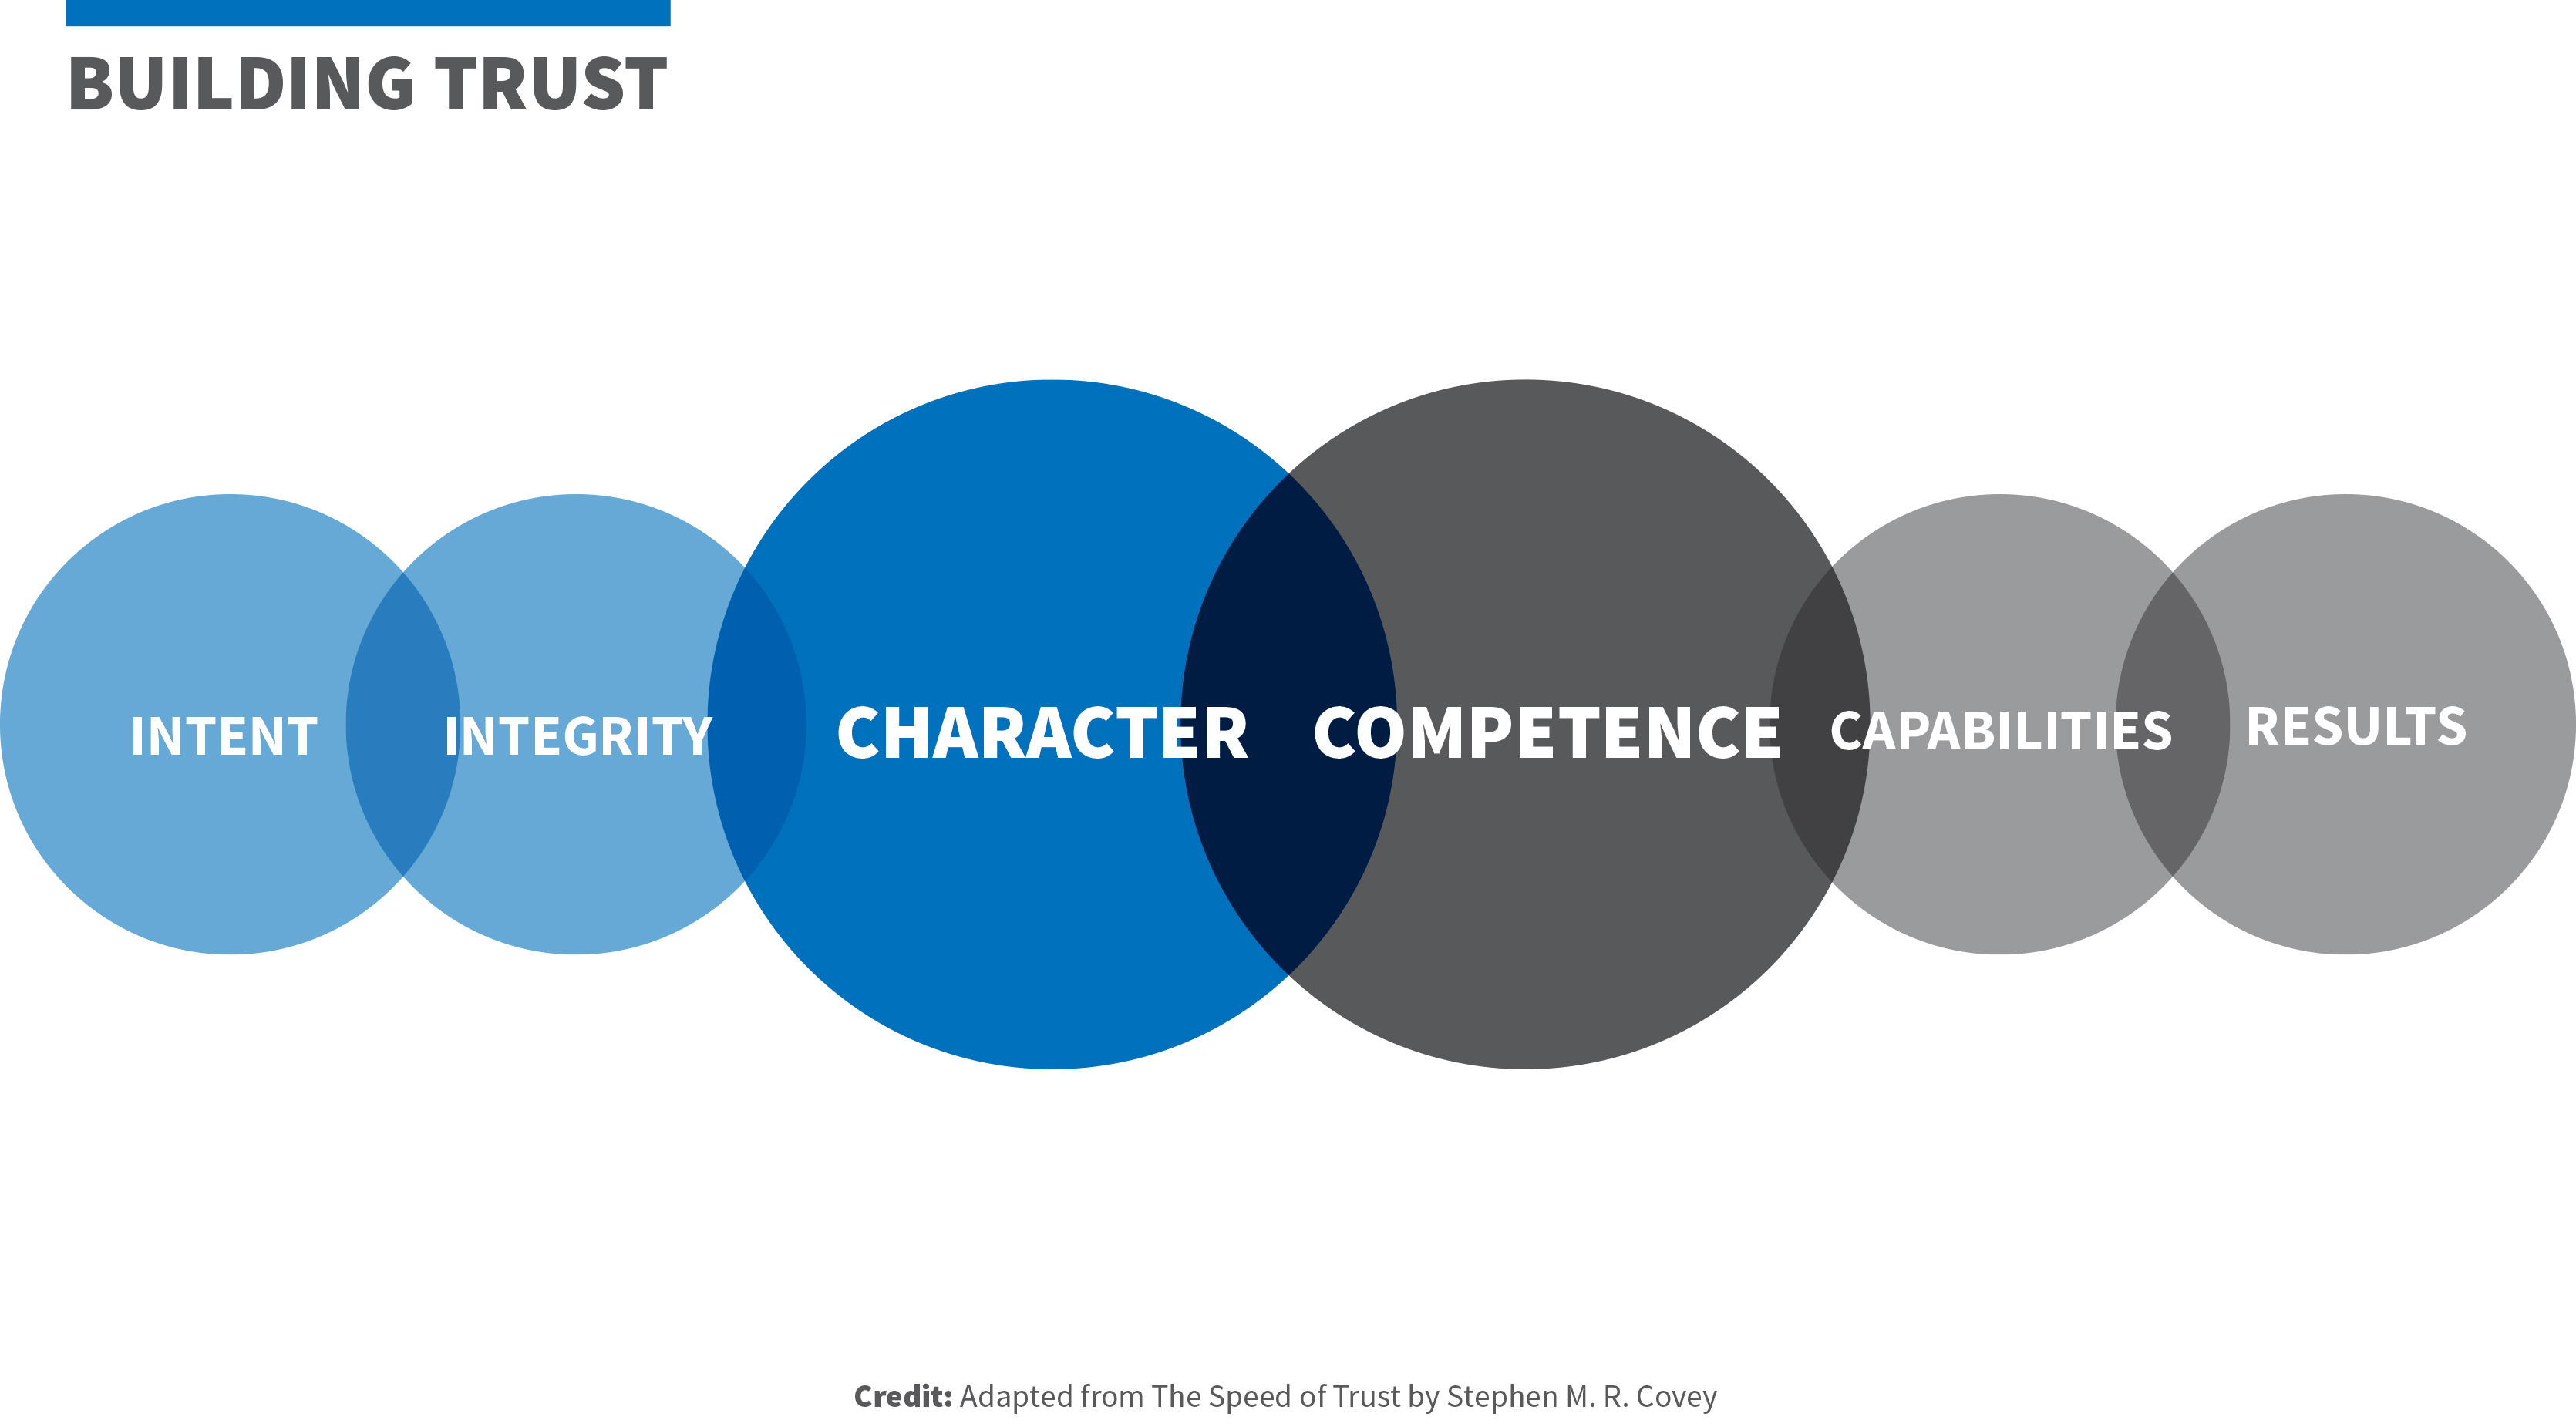 Building trust image. Character = Integrity and Intent. Competence = Capabilities and Results.